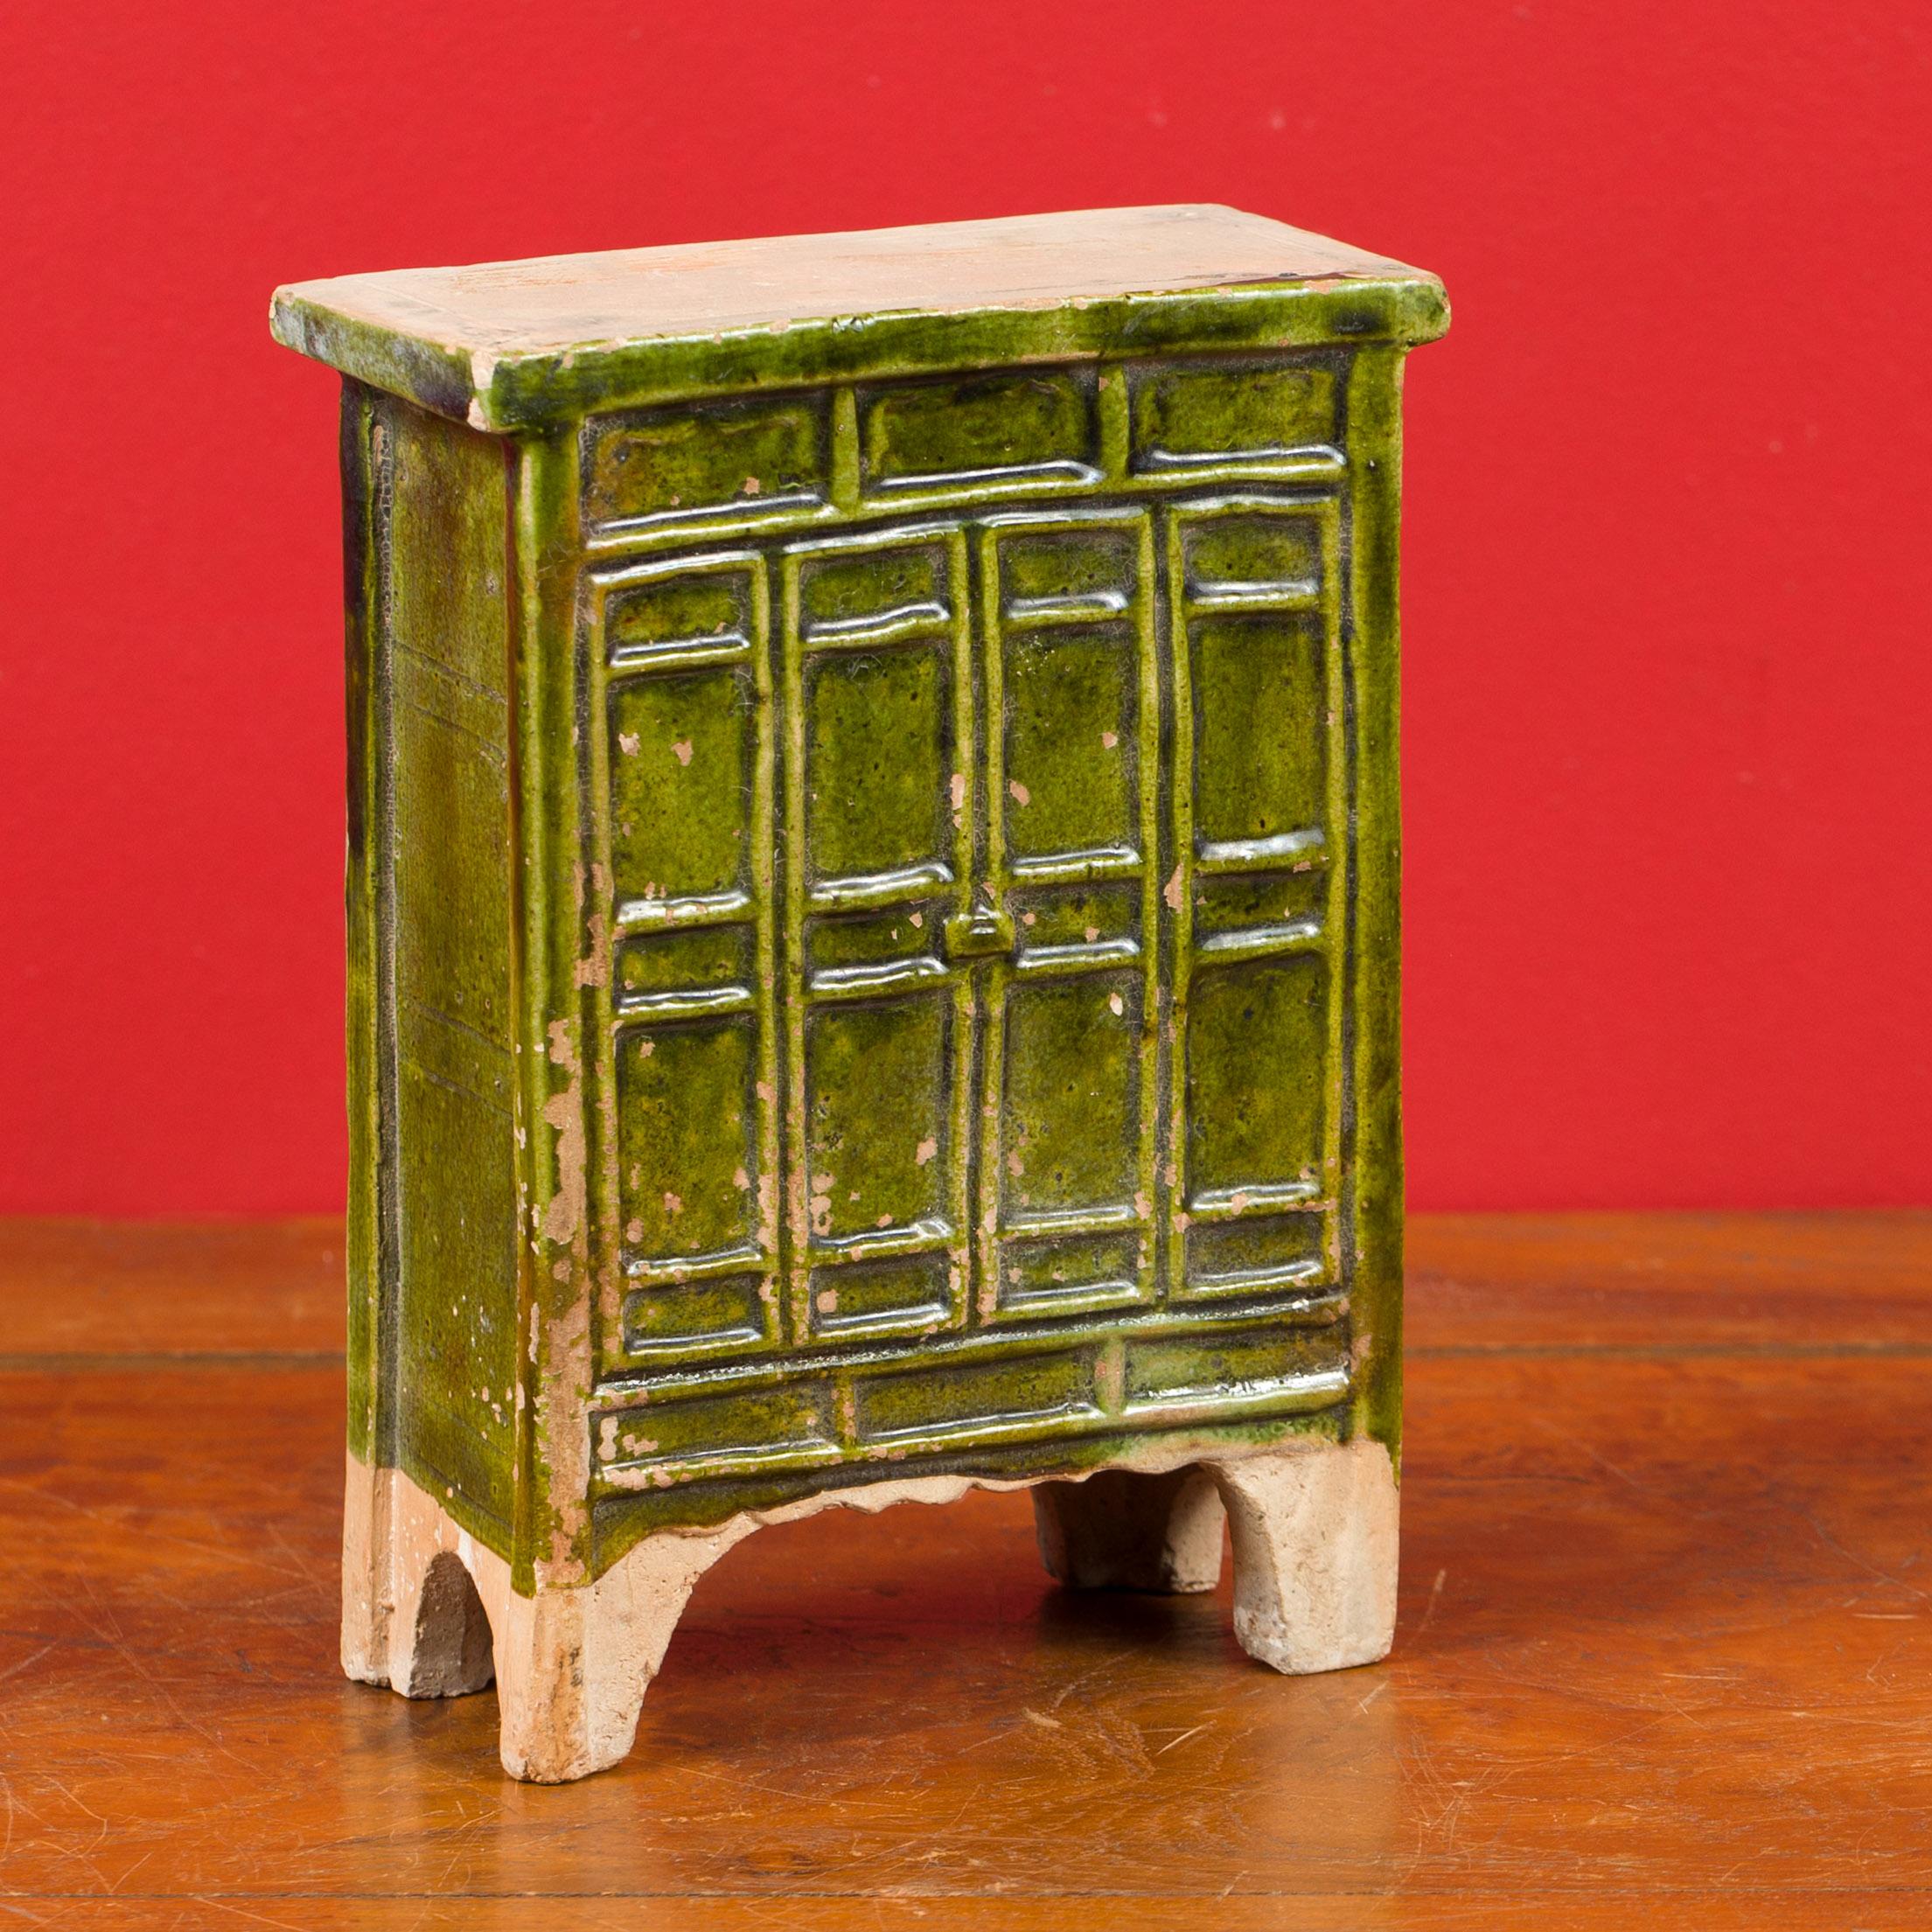 A Chinese Ming Dynasty period miniature terracotta armoire with green glazed finish and bracket feet. Created in China during the Ming Dynasty (1368 - 1644), this exquisite miniature terracotta armoire is a captivating example of historical